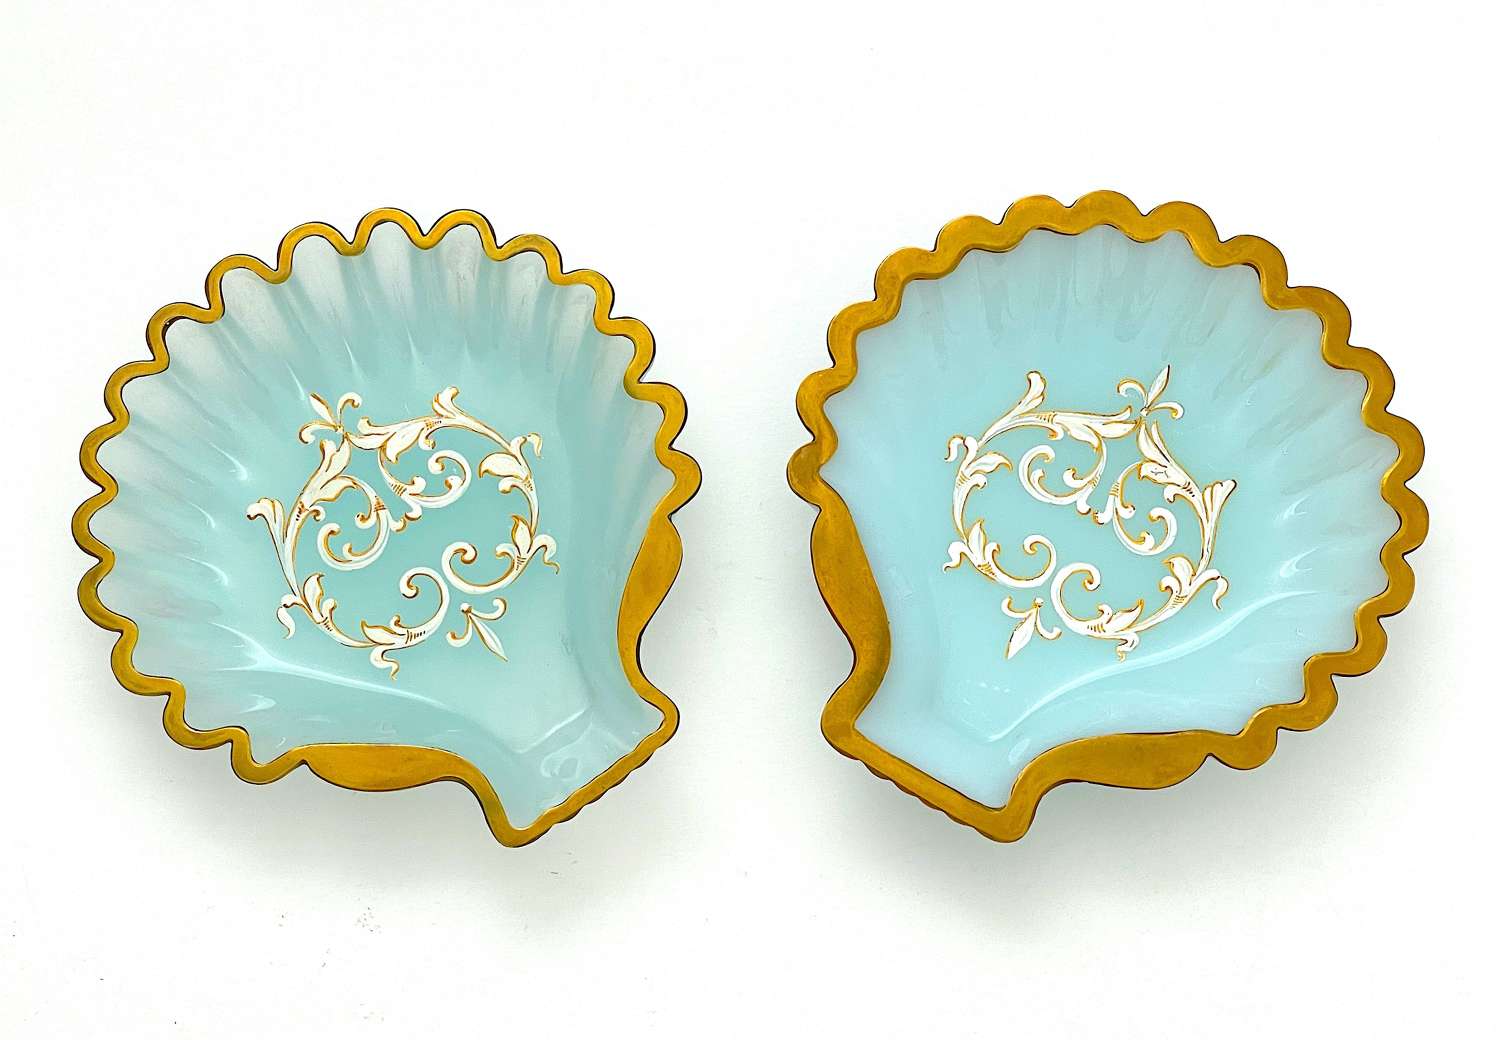 A Pair of Unusual Antique French Opaline Glass Scallop Shell Dishes